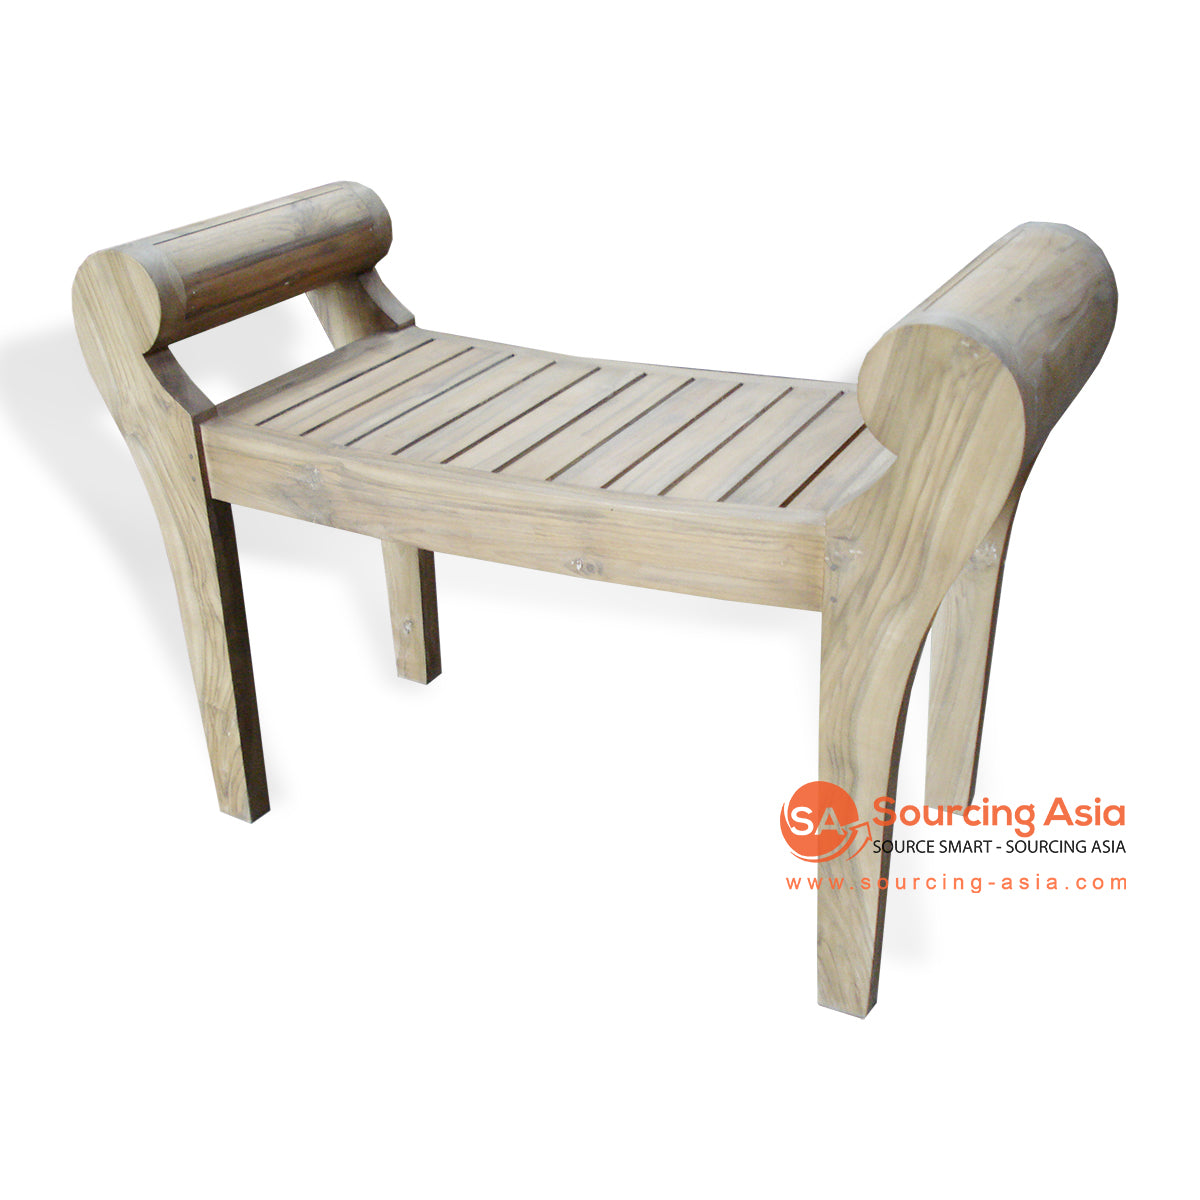 AC-BNNW01 BLEACHED TEAK WOOD BED END BENCH